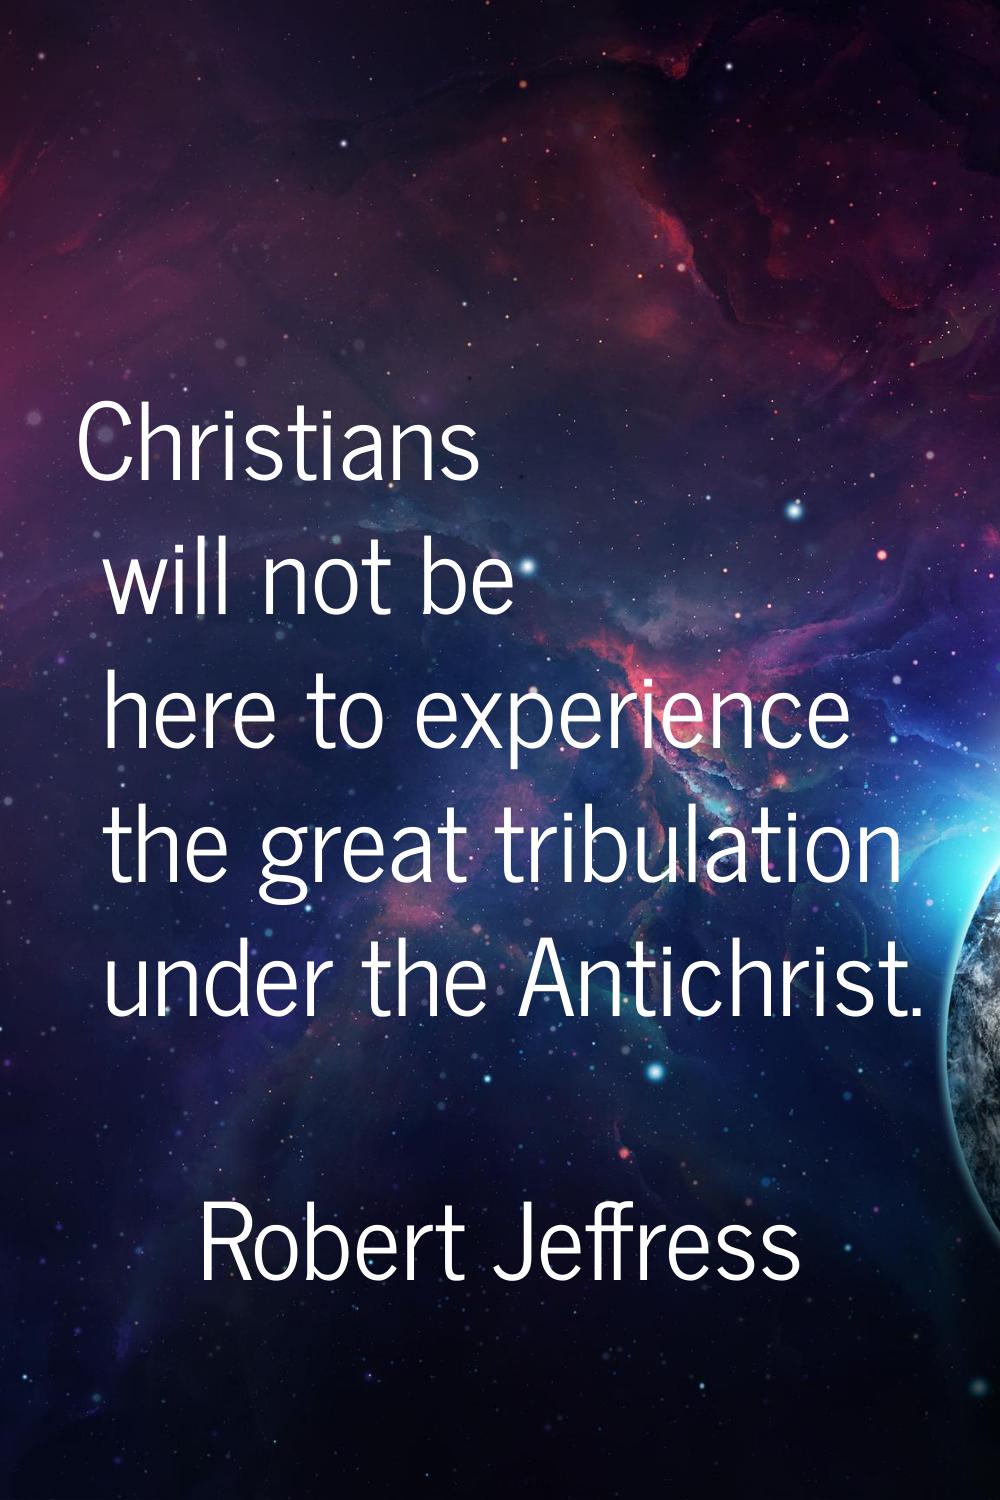 Christians will not be here to experience the great tribulation under the Antichrist.